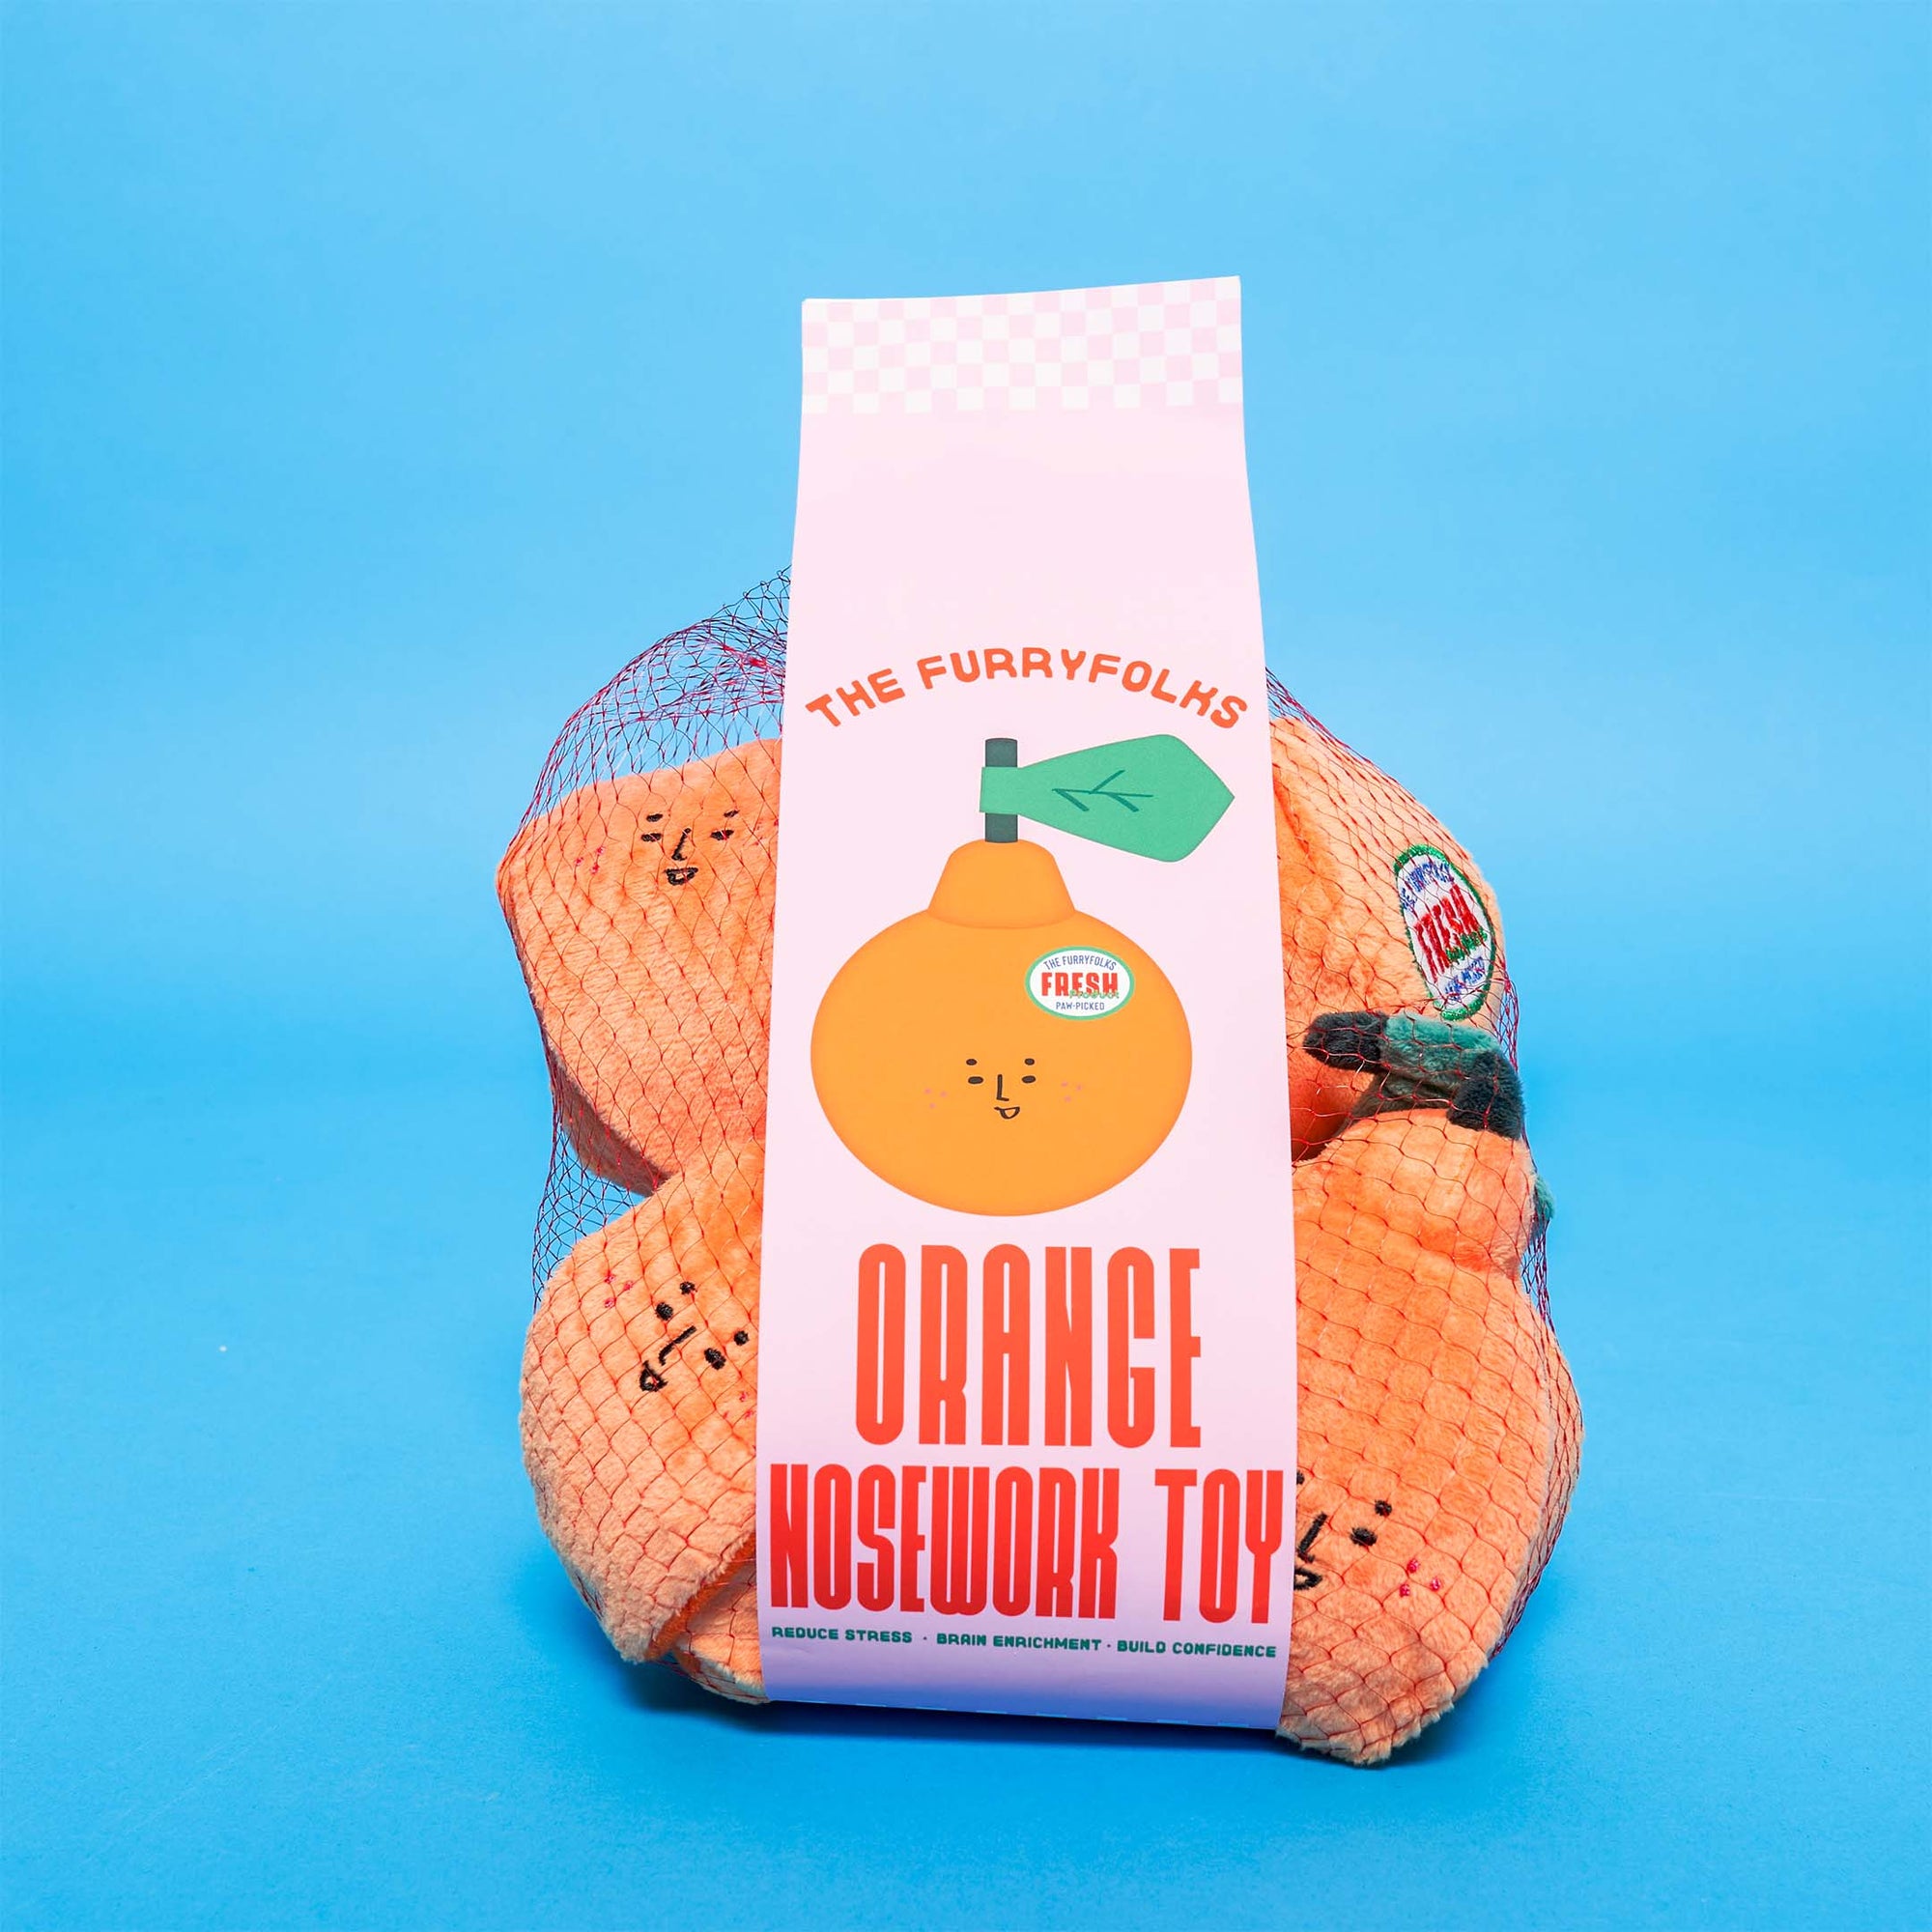 A mesh bag of orange-shaped dog toys on a blue background, with a label that reads "The Furryfolks Orange Nosework Toy," suggesting freshness and fun for pets.